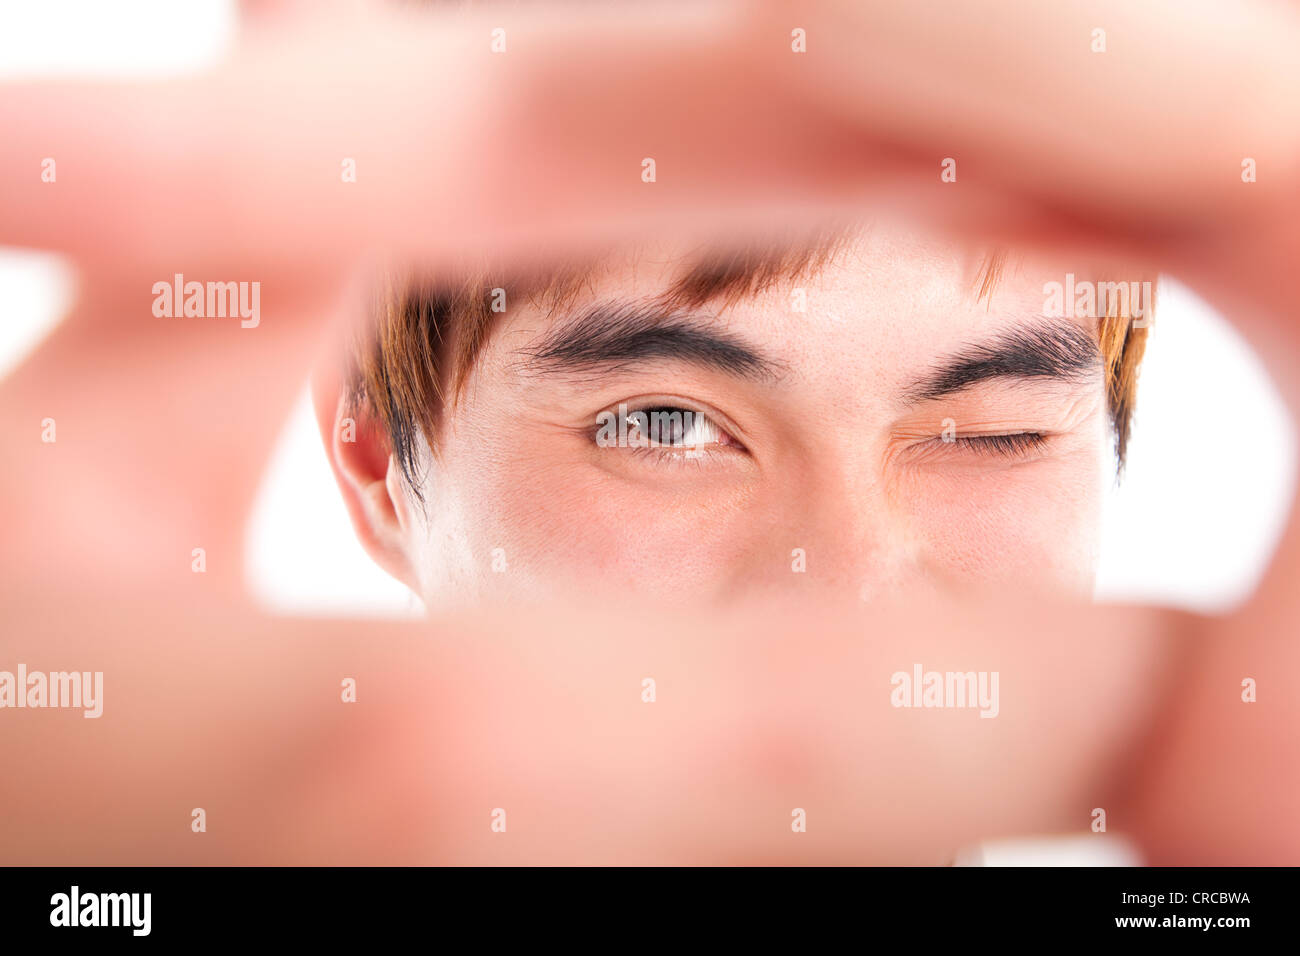 young man showing thinking outside the square concept Stock Photo